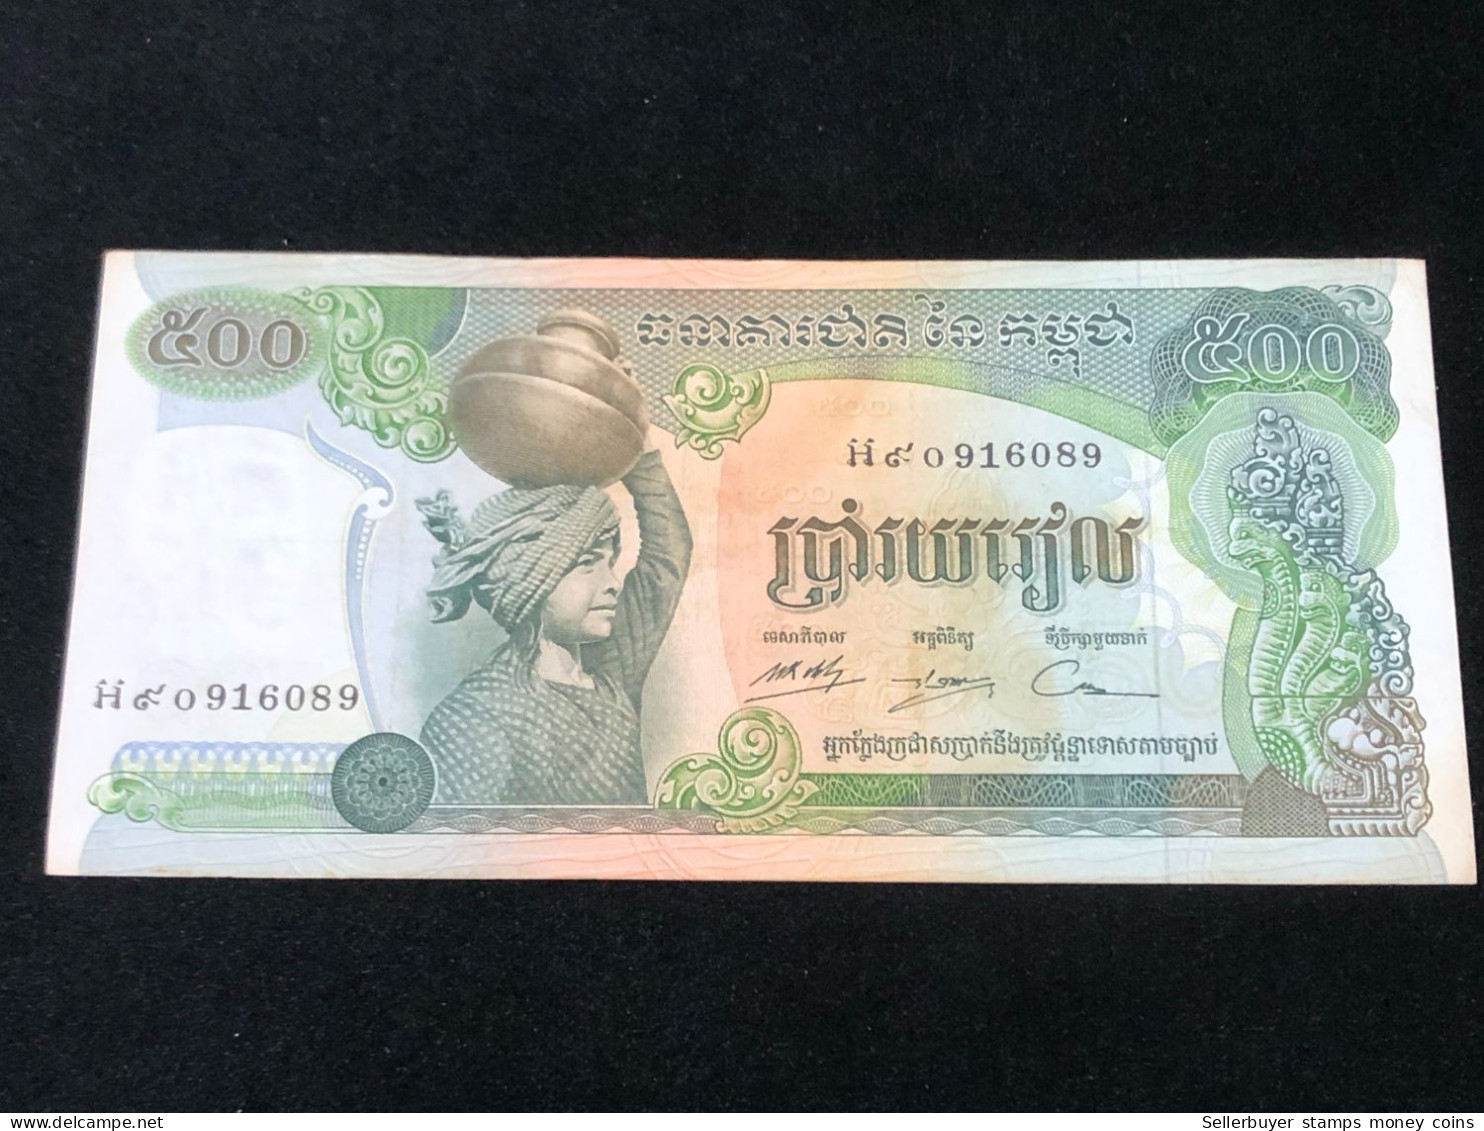 Cambodia Banknotes 500 Riels 1973-75 -replacement Note-1 Pcs Aunc Very Rare - Cambodia